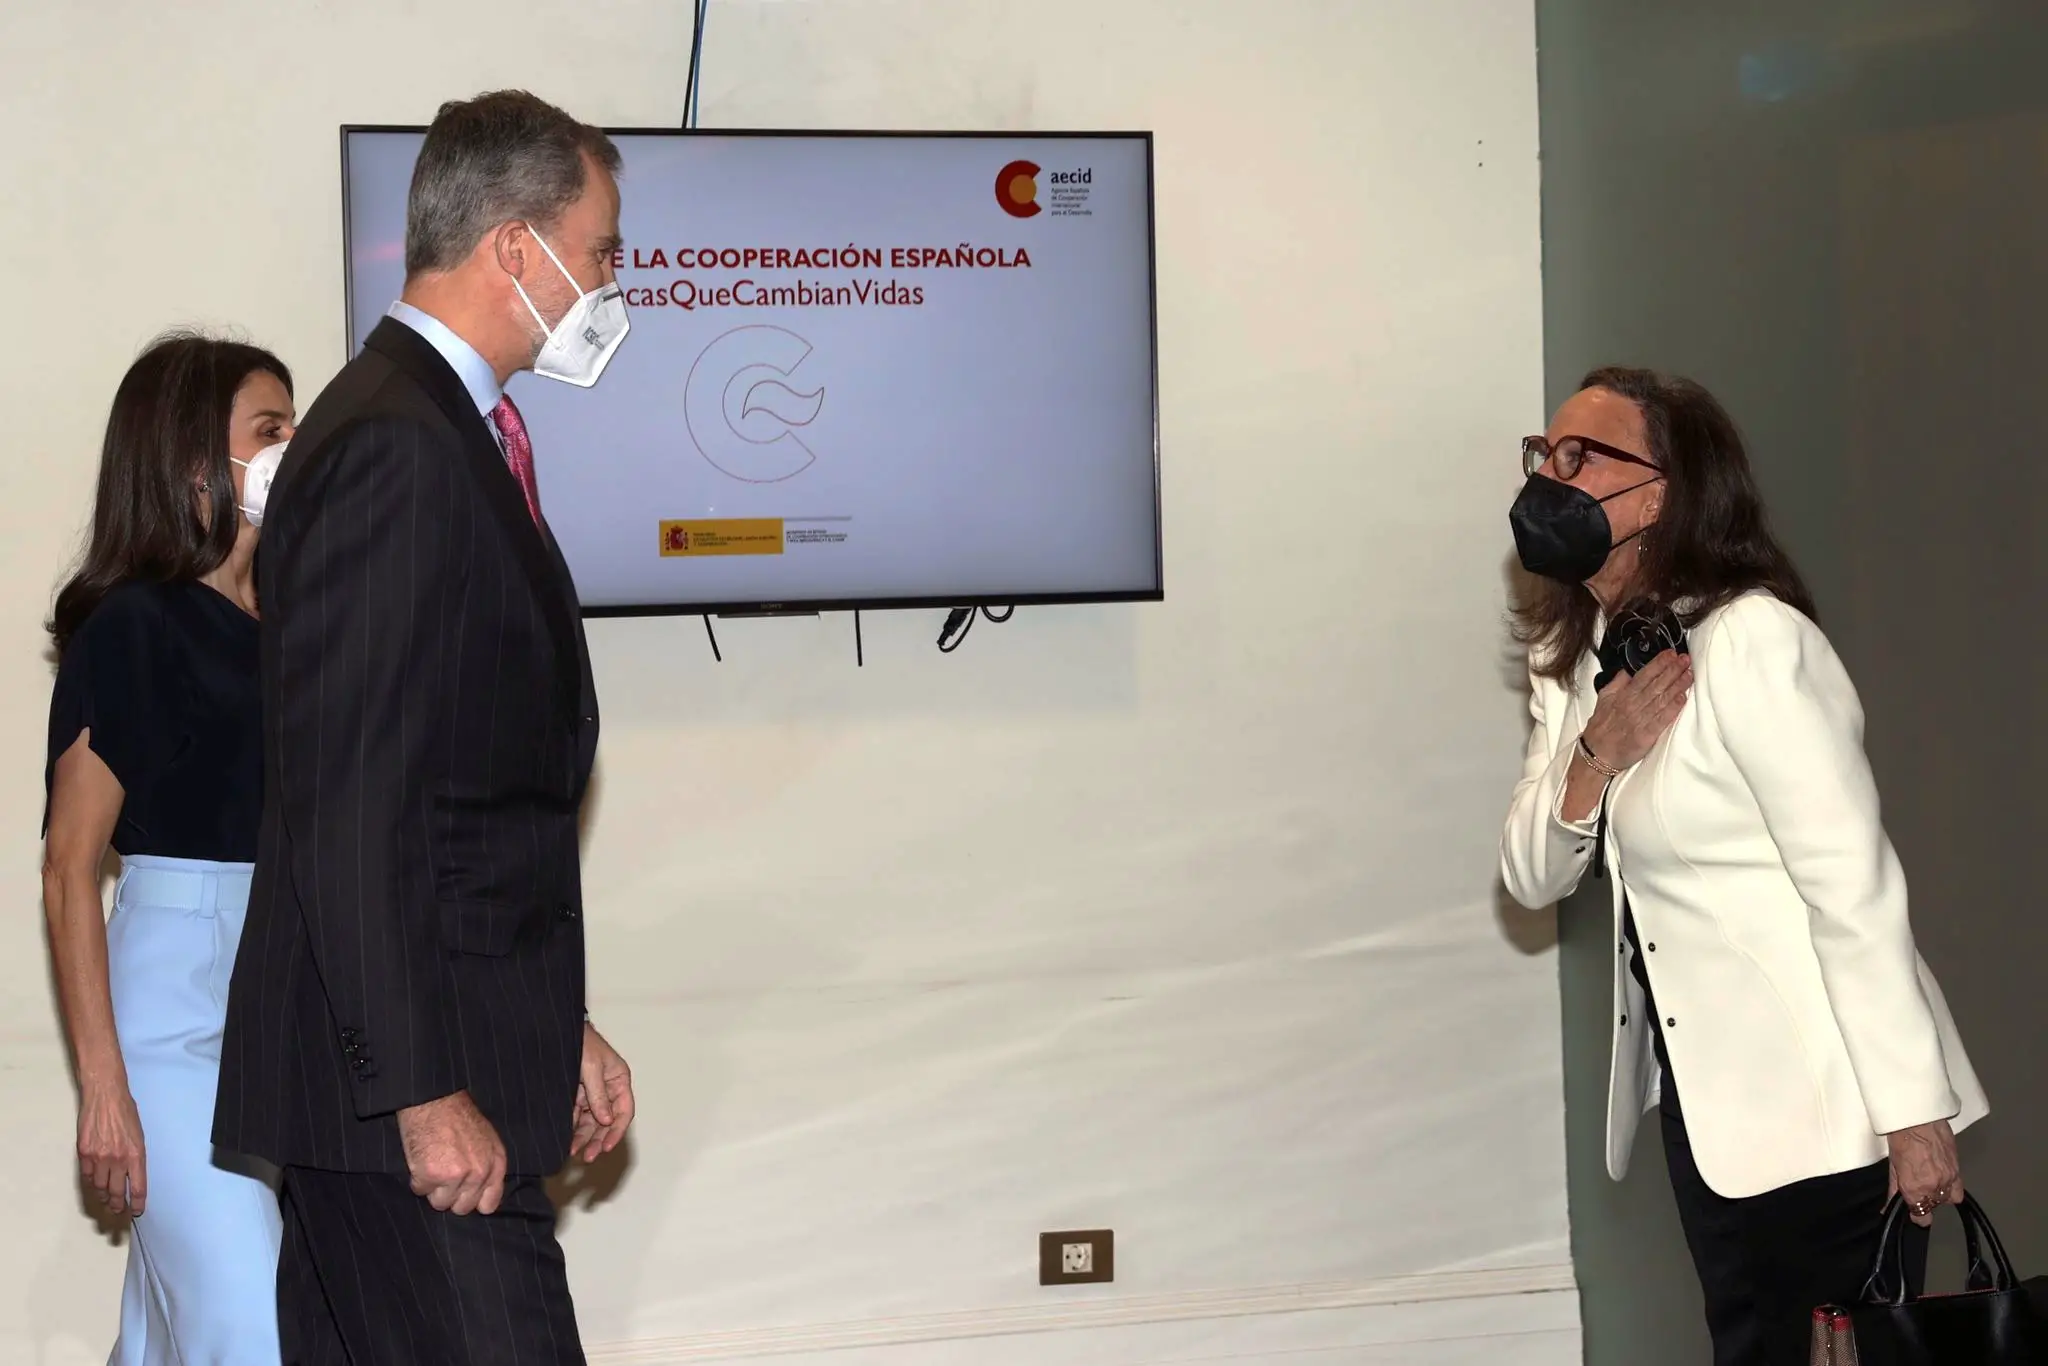 King Felipe and Queen Letizia of Spain today presented the “Scholarships of The Spanish Cooperation #BECASQUECAMBIANVIDAS” at the Viana Palace